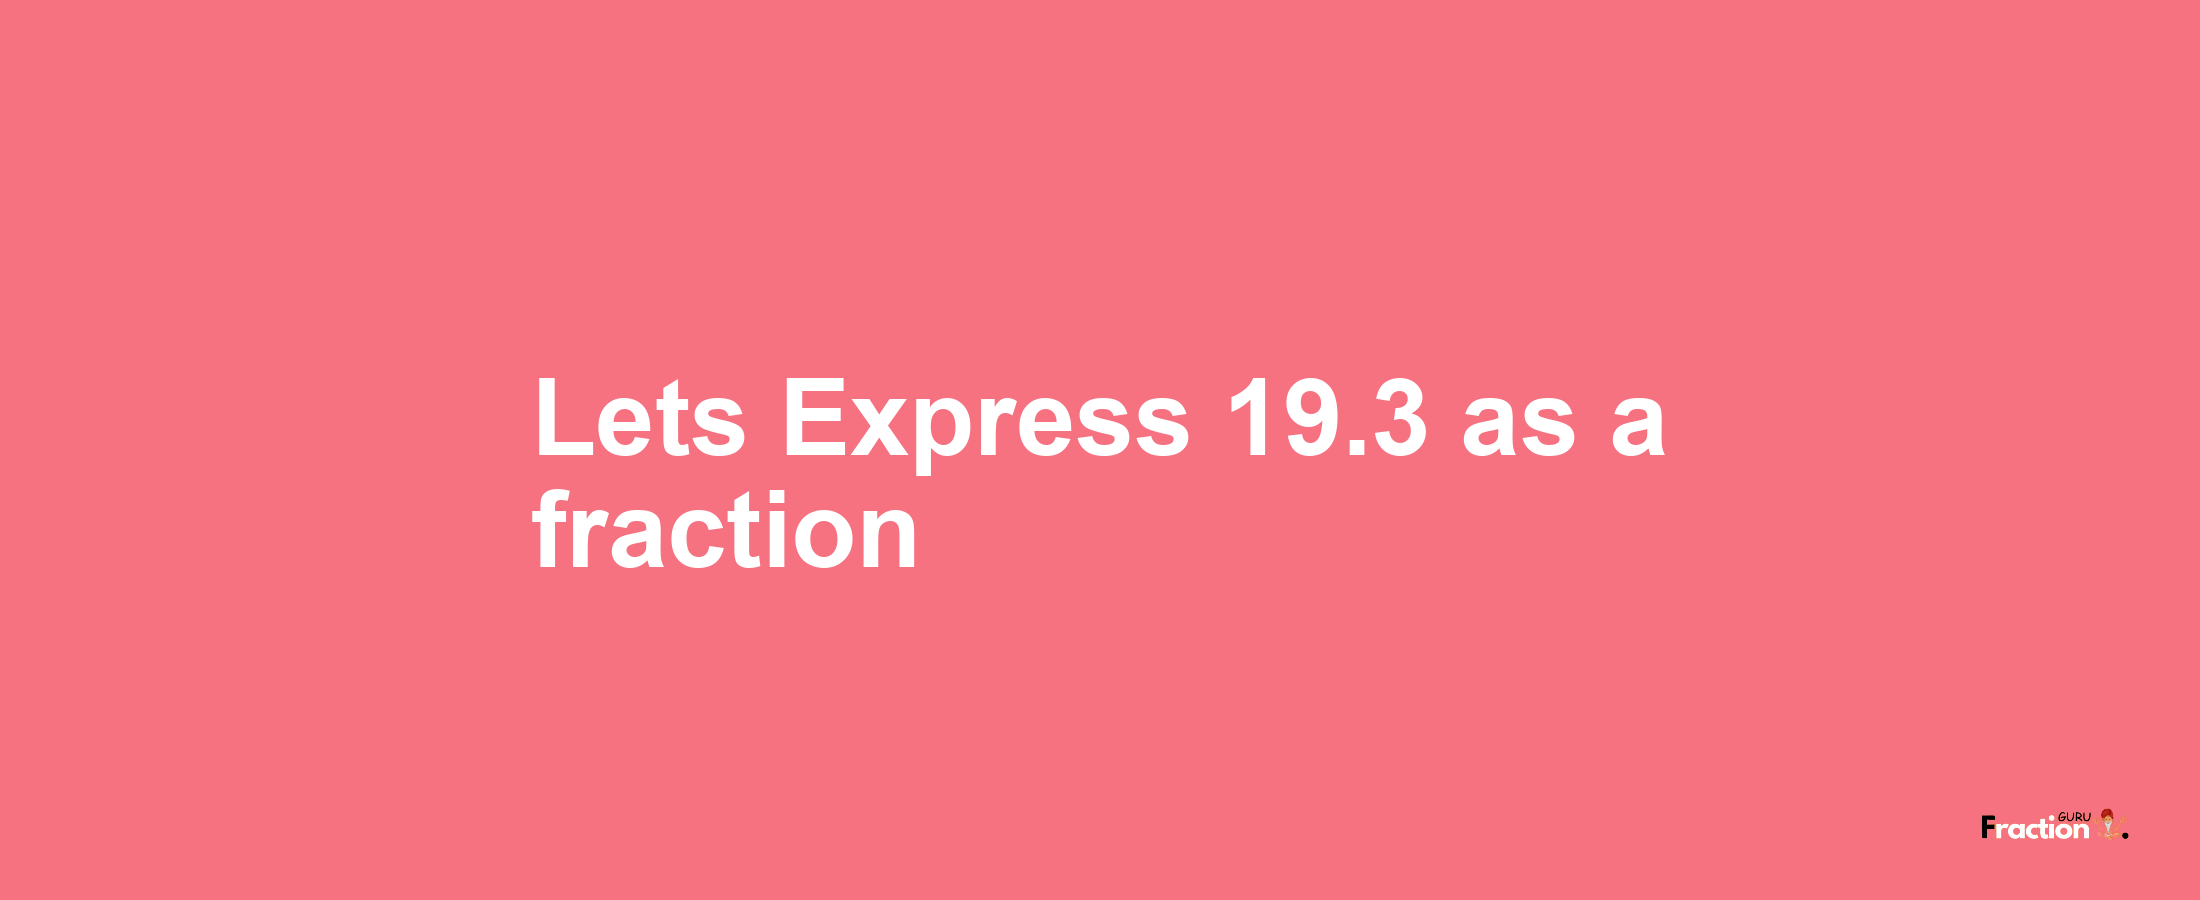 Lets Express 19.3 as afraction